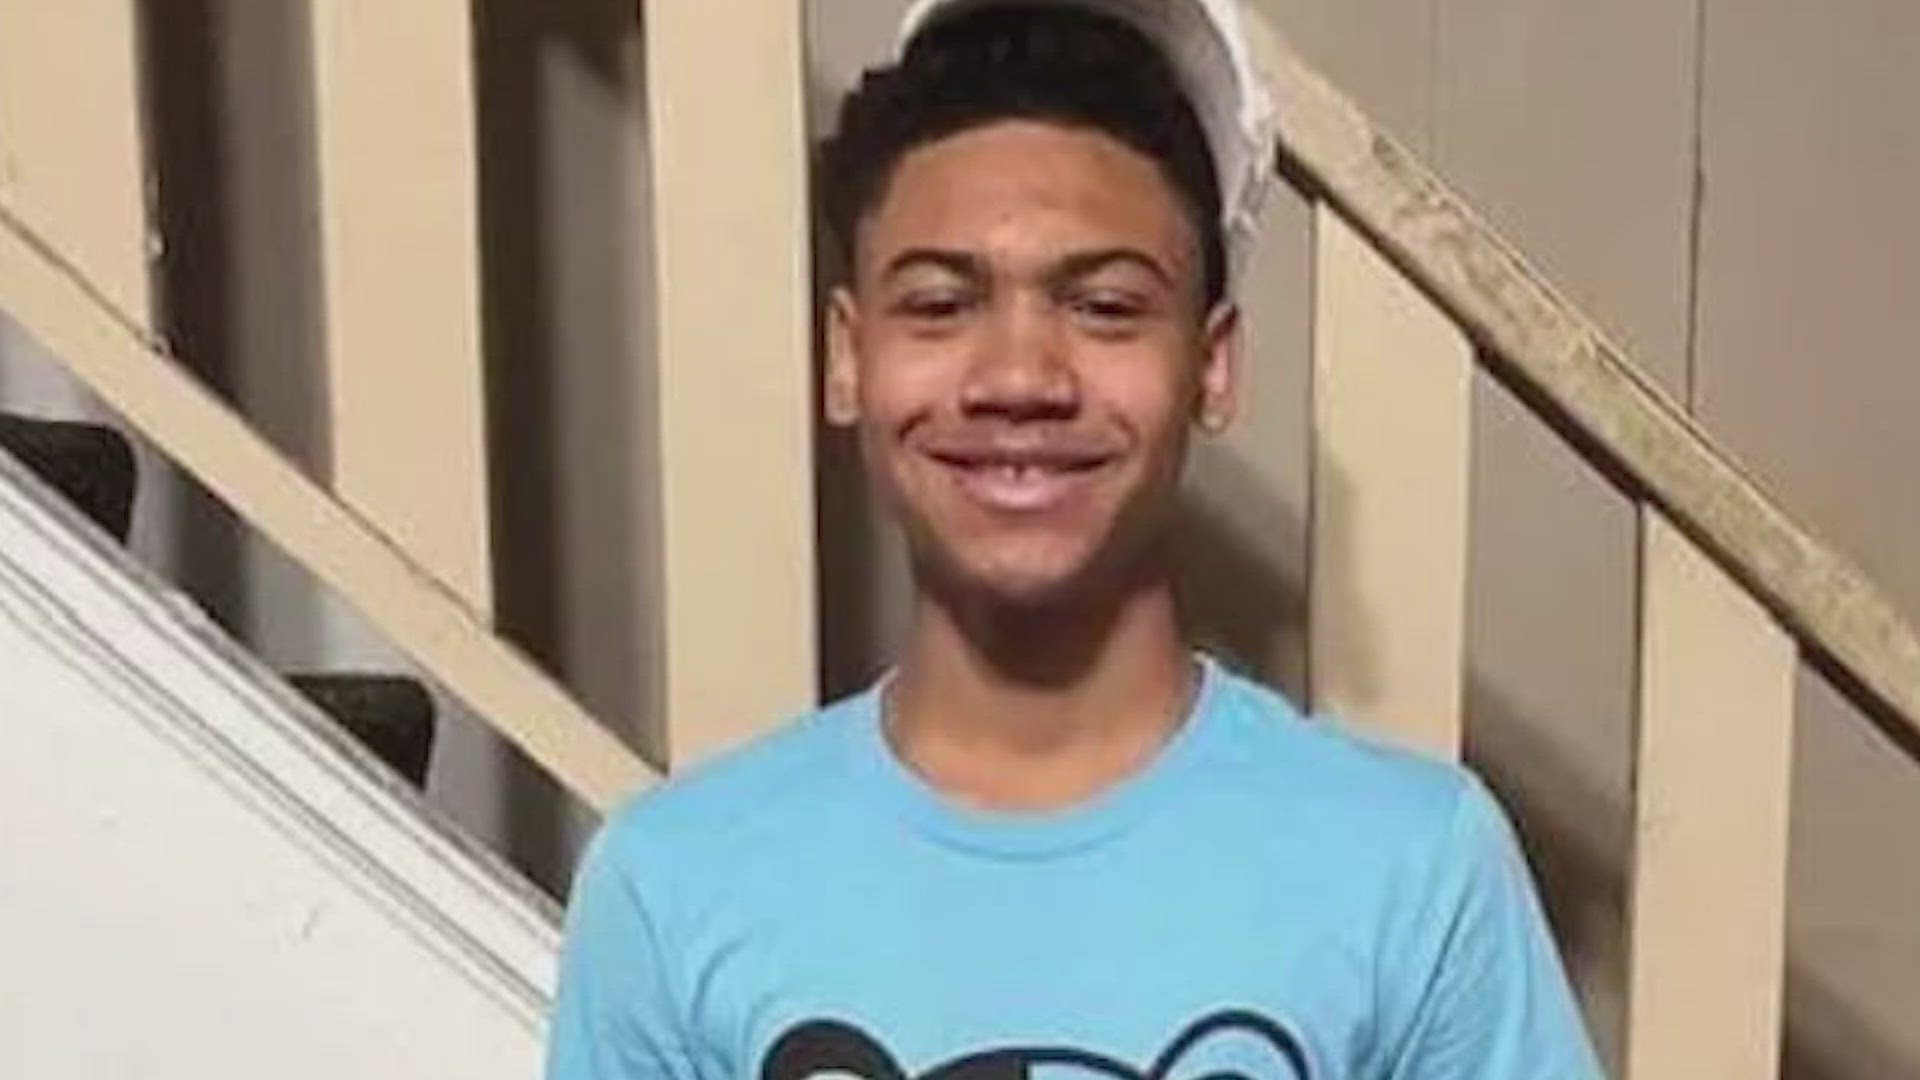 Family members identified the teen victim as Jashawn Poirier.